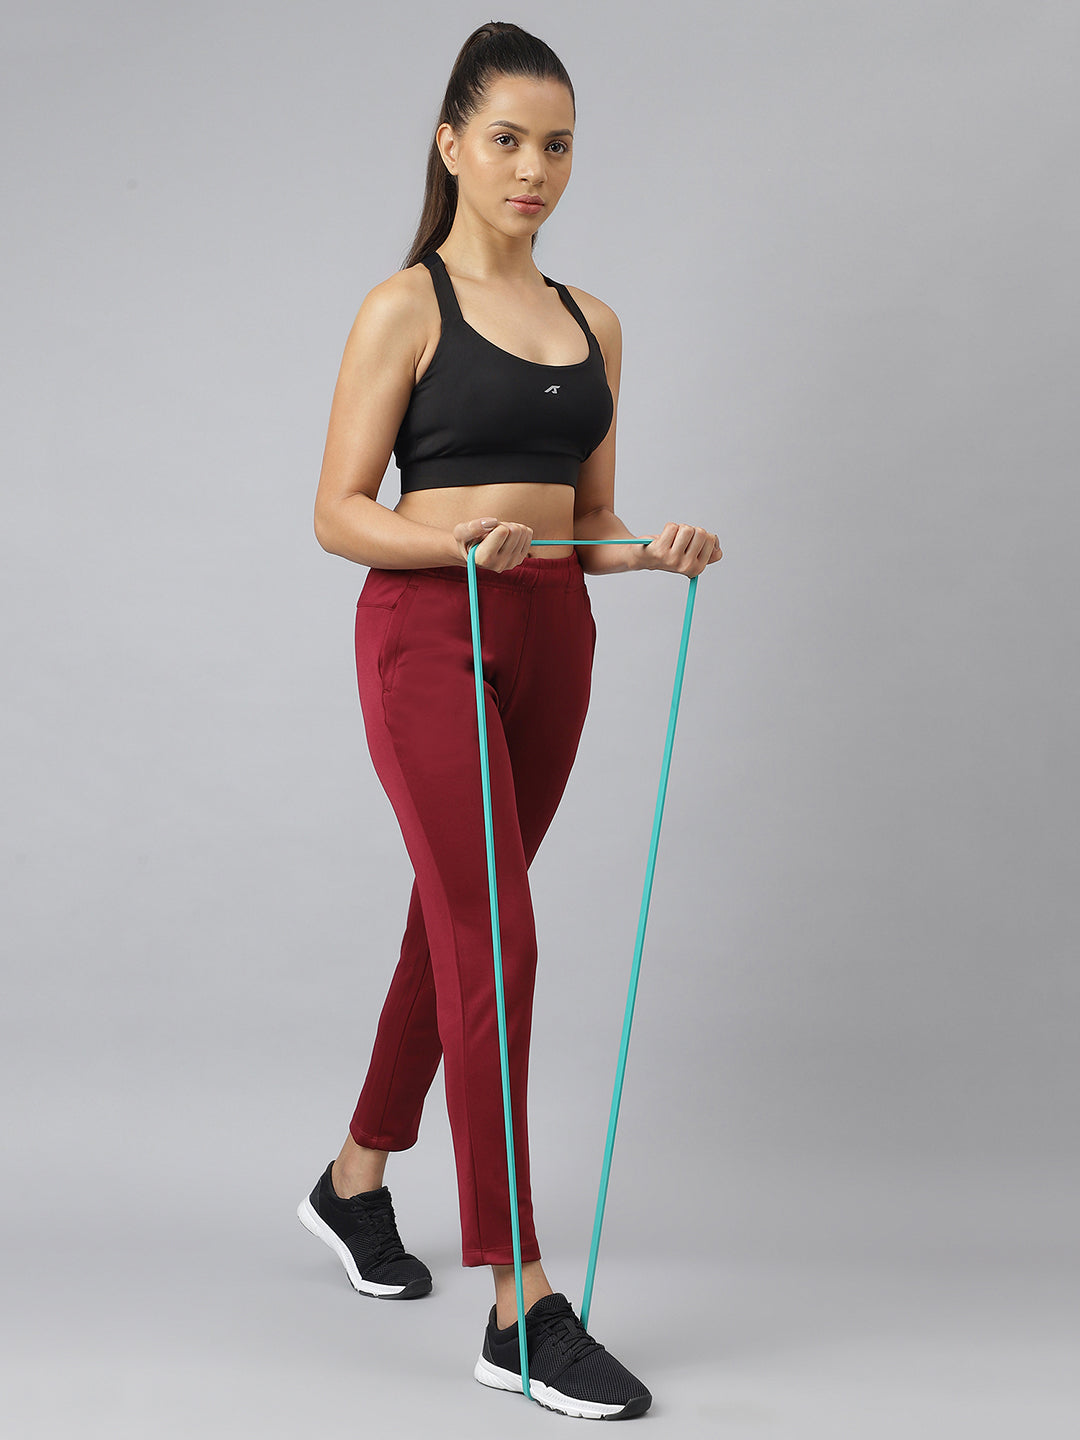 Alcis Women Red Plum Anti-Static Soft-Touch Slim-Fit Training Track Pants